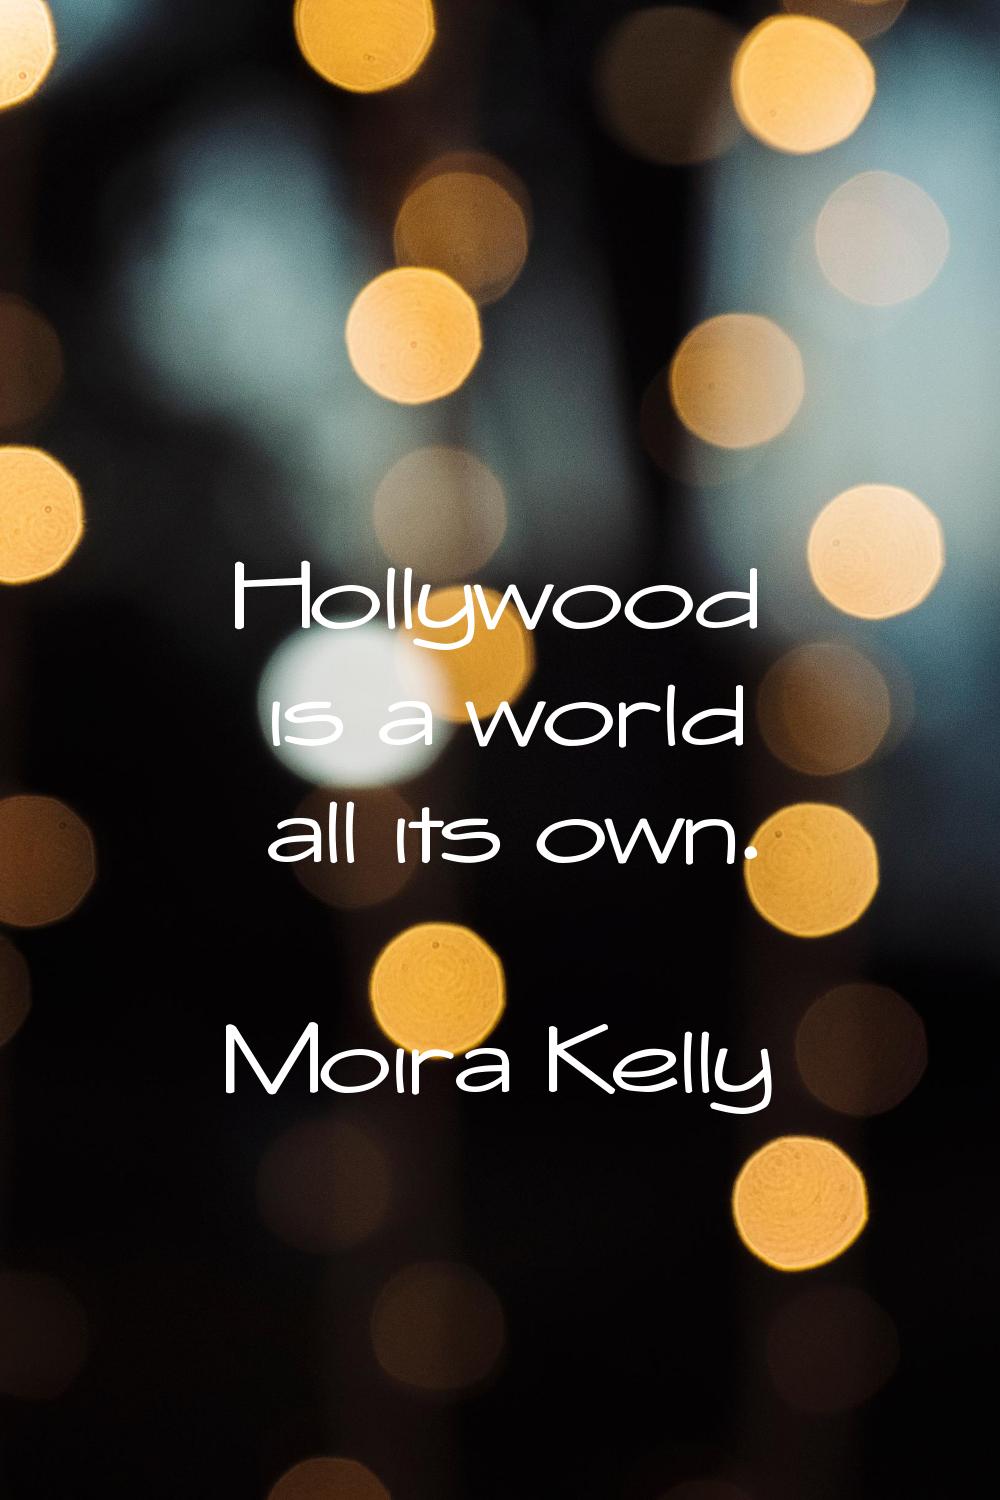 Hollywood is a world all its own.